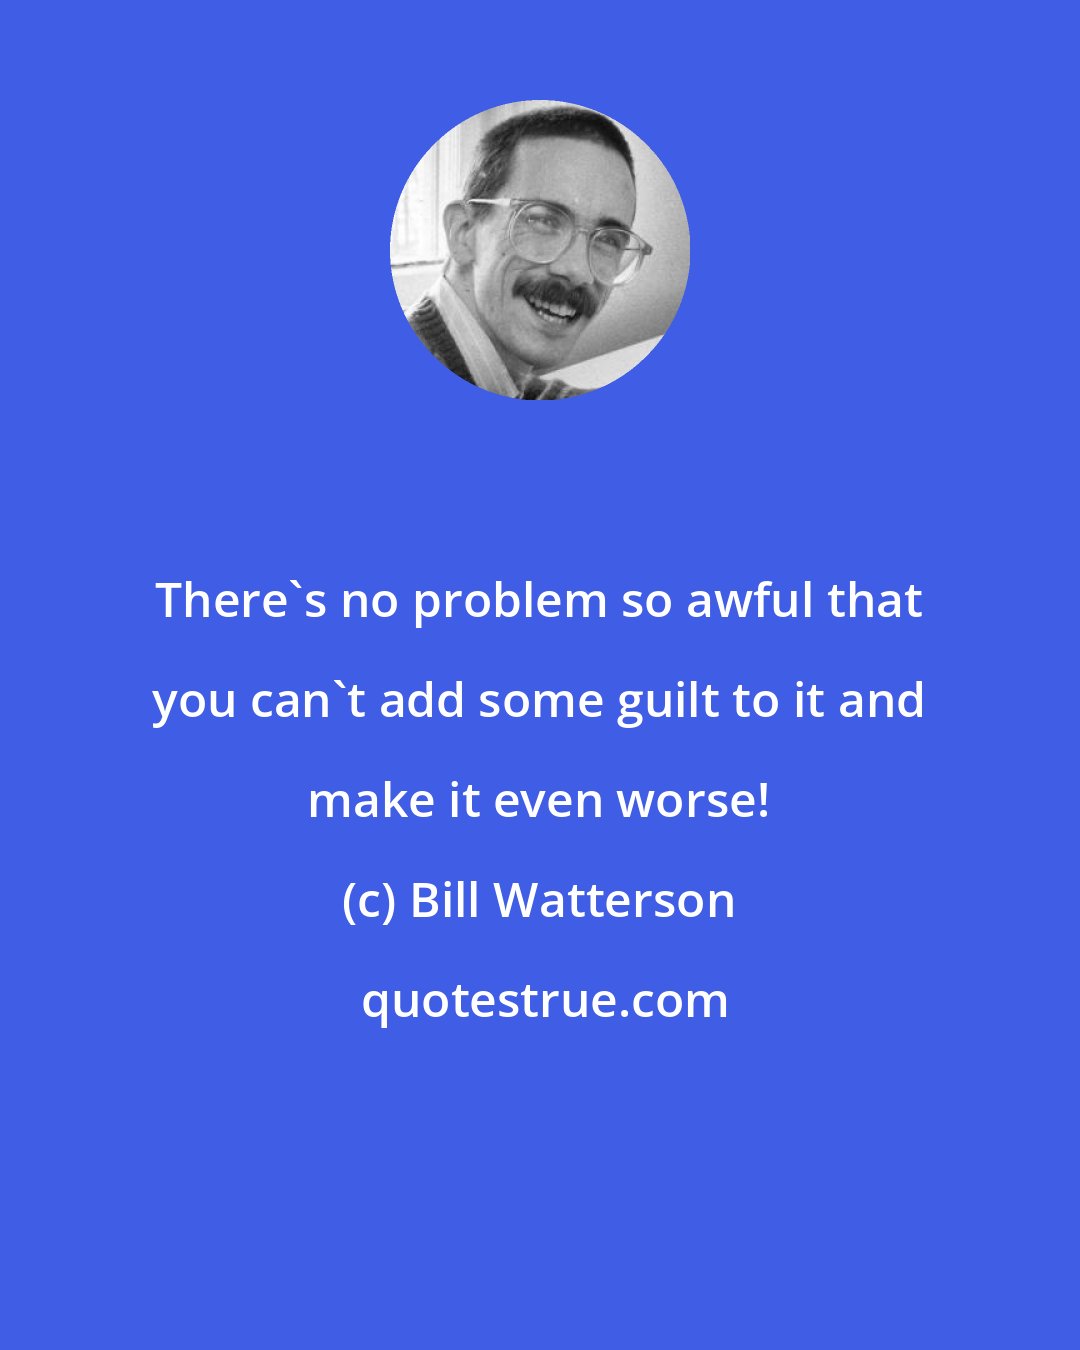 Bill Watterson: There's no problem so awful that you can't add some guilt to it and make it even worse!